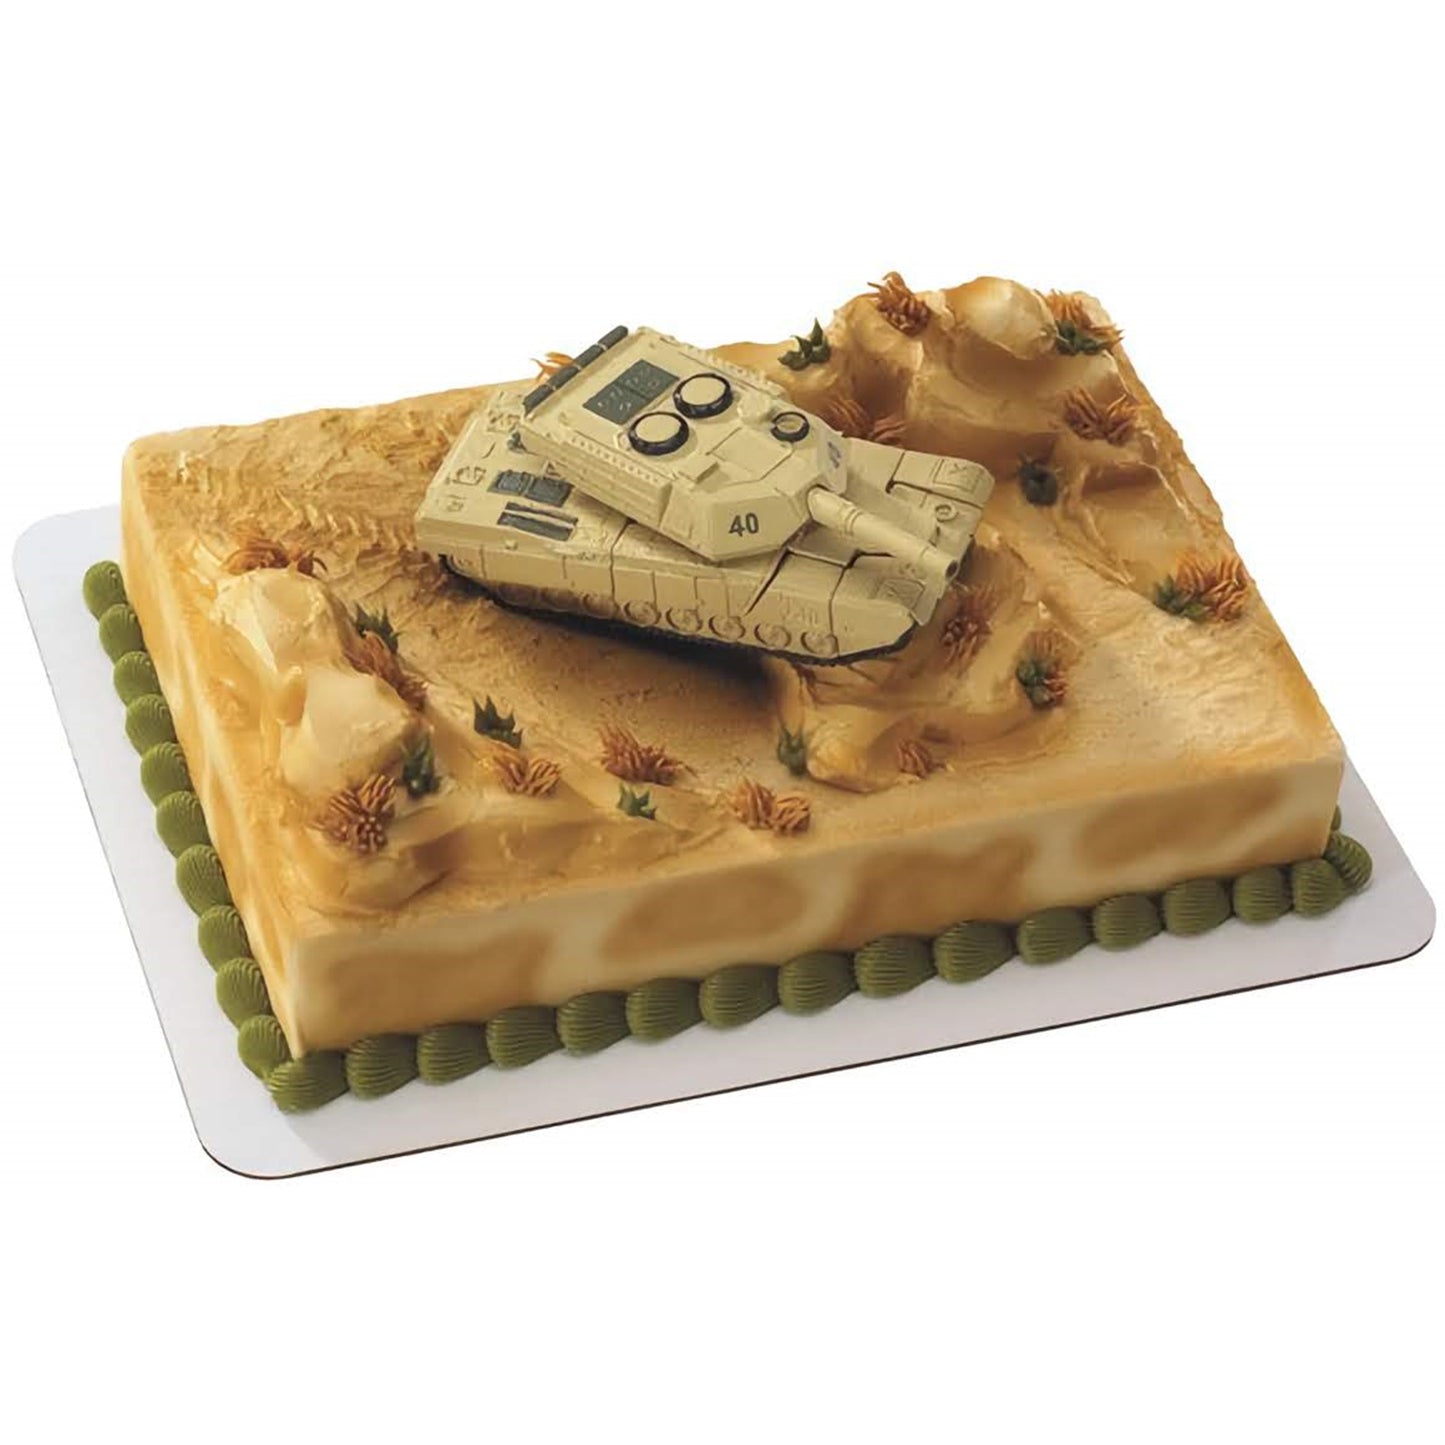 Realistic military tank cake topper set on a desert battlefield-themed sheet cake, complete with detailed tank treads, barrel, and desert flora. Perfect for military appreciation events or themed birthday parties.